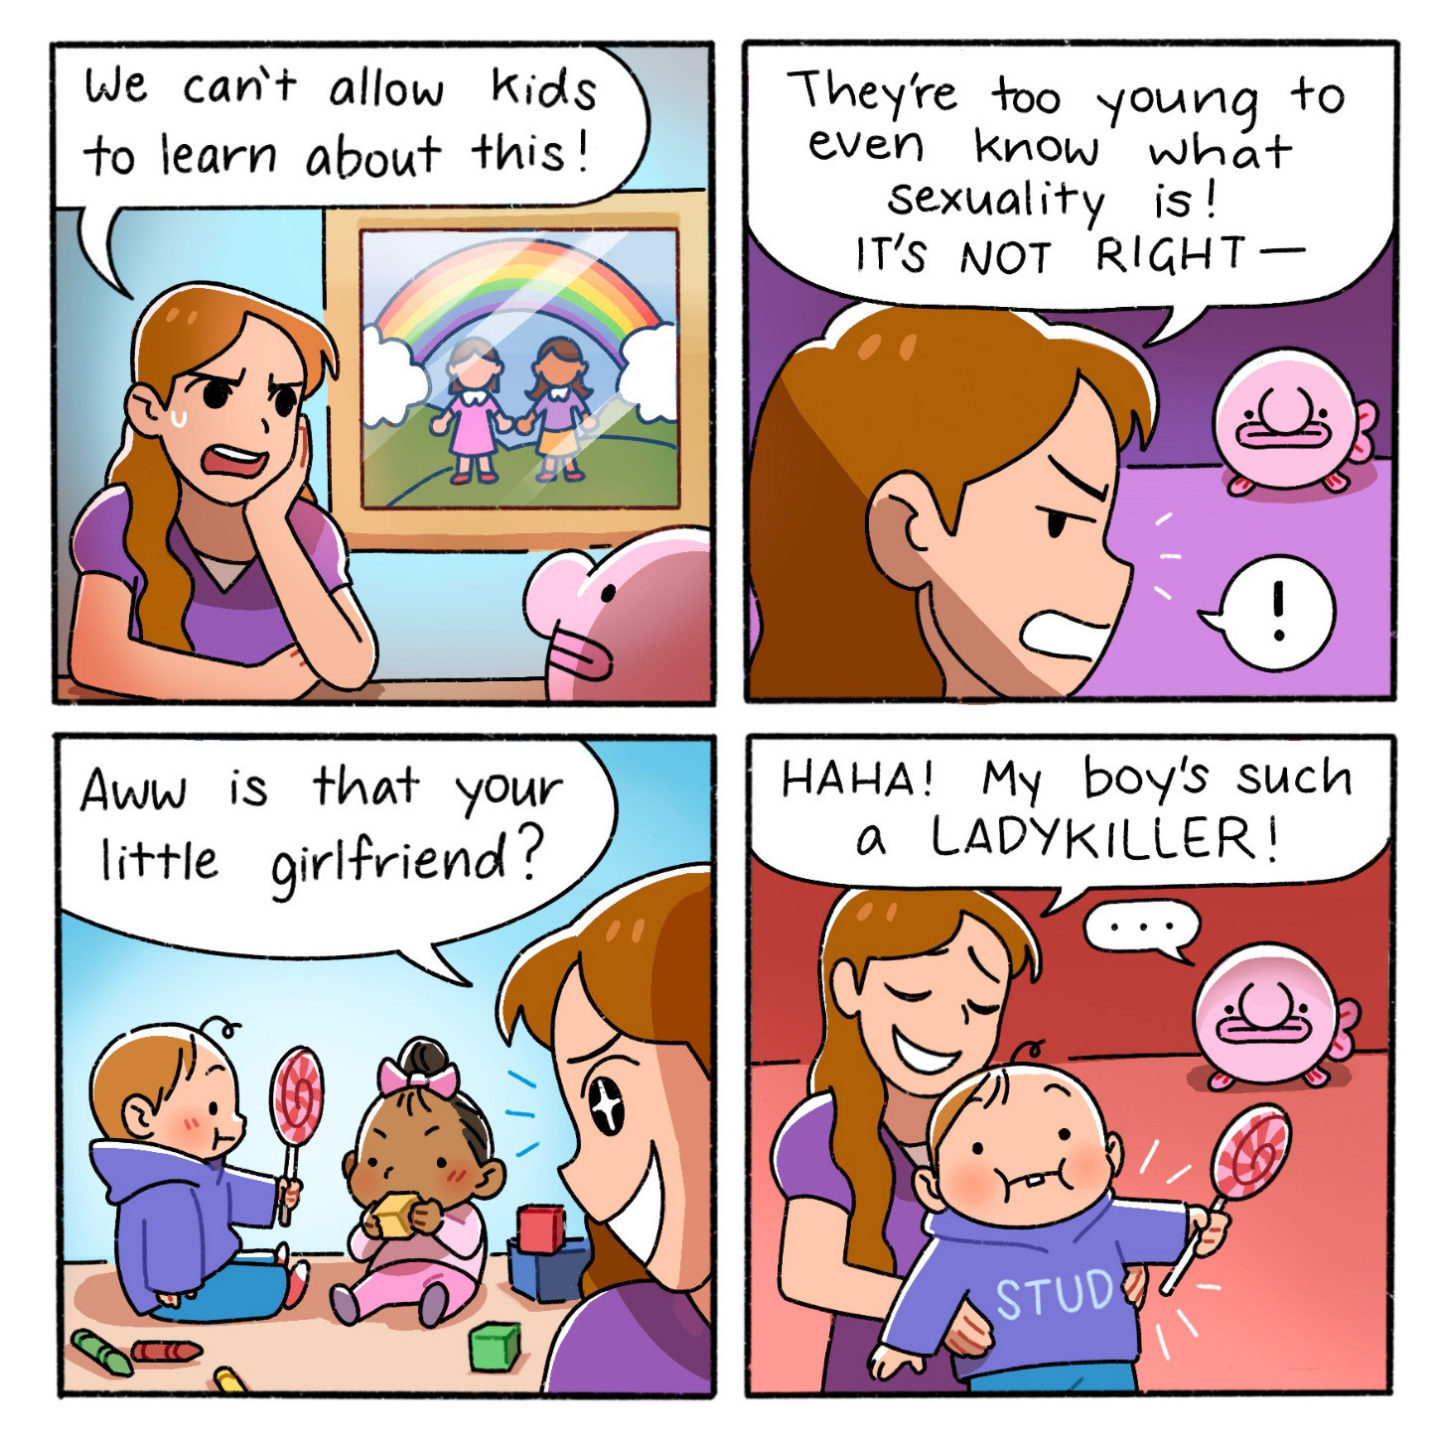 Comic frame 1: person looks at a picture of two women holding hands under a rainbow and says We can't allow kids to learn about this! Frame 2: They're two young to know what sexuality is! It's not right! Frame 3: Same person looks at two babies (one wearing blue and the other pink) and says Aww is that your girlfriend? Frame 4: Same person, holding the baby wearing blue, says Haha! My boy's such a ladykiller!